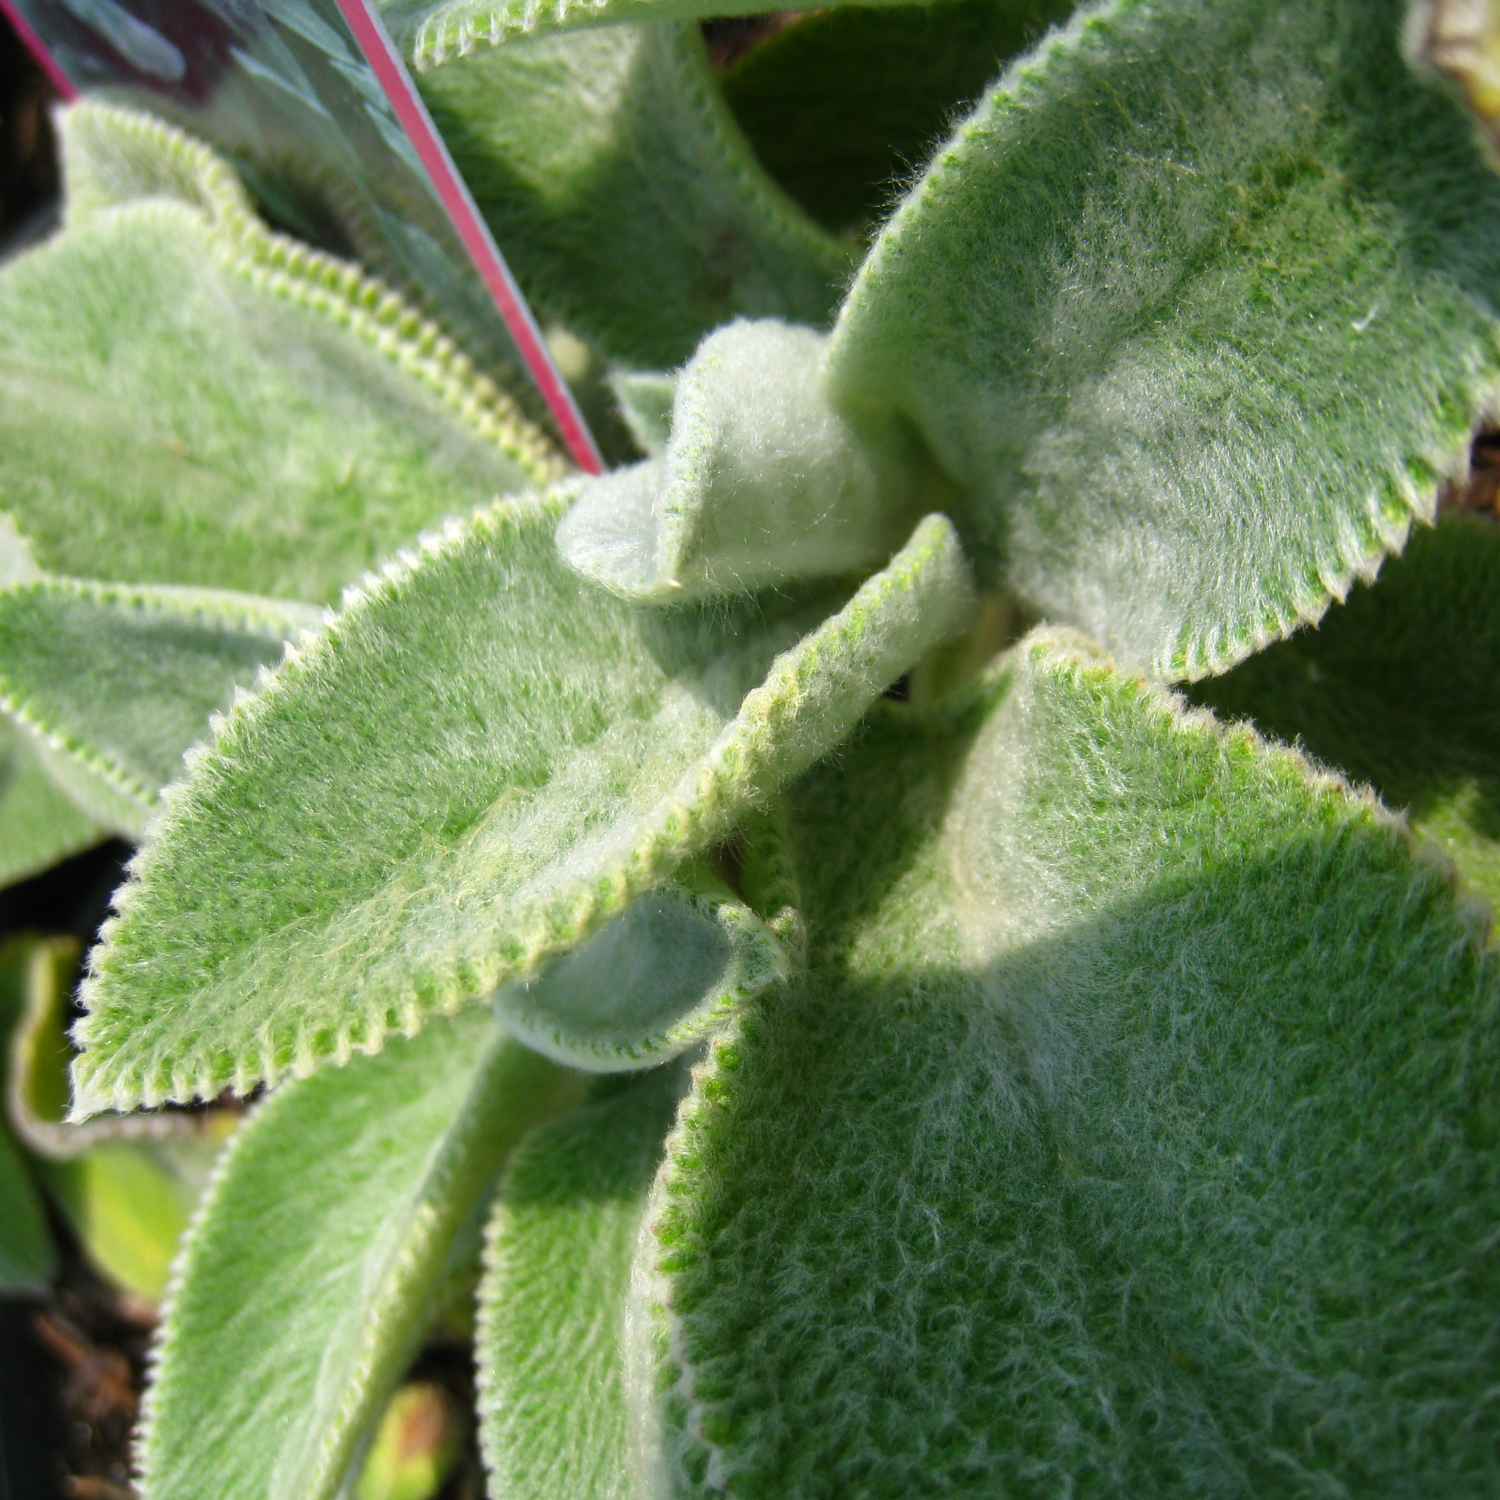 Fuzzy Plant. Beautiful Mature Leaves Take On A Fuzzy With Fuzzy ...